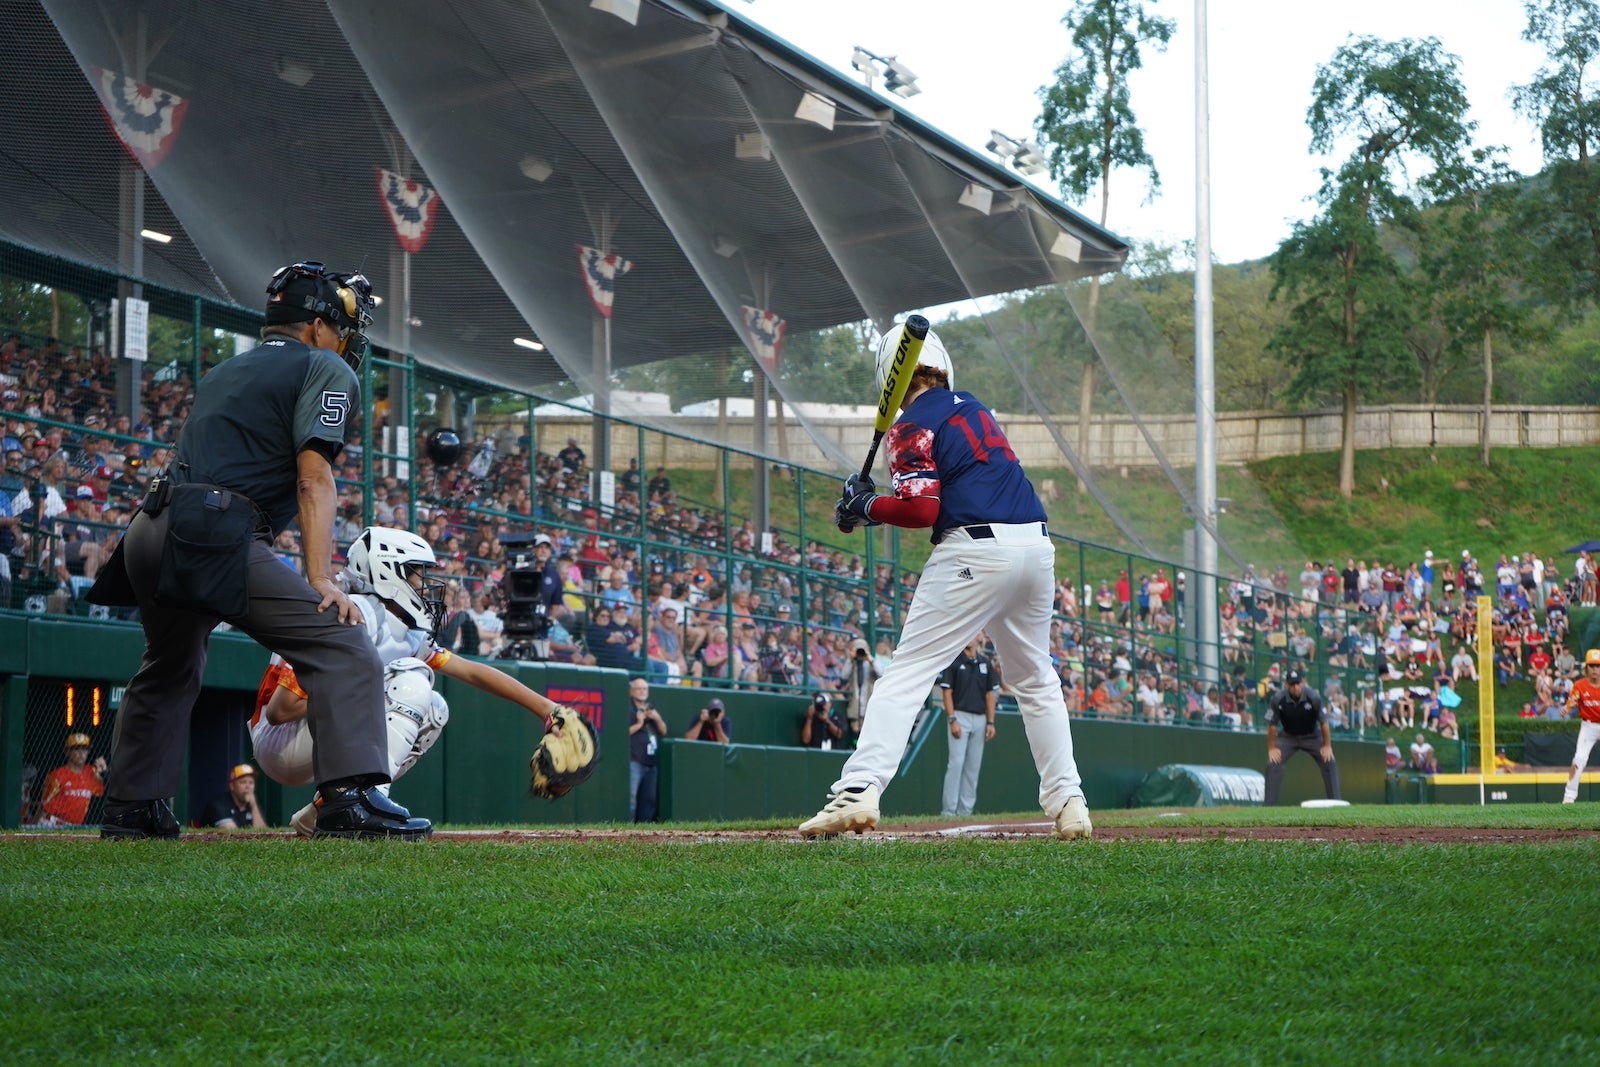 Maine looks to stay alive in Little League World Series Saturday